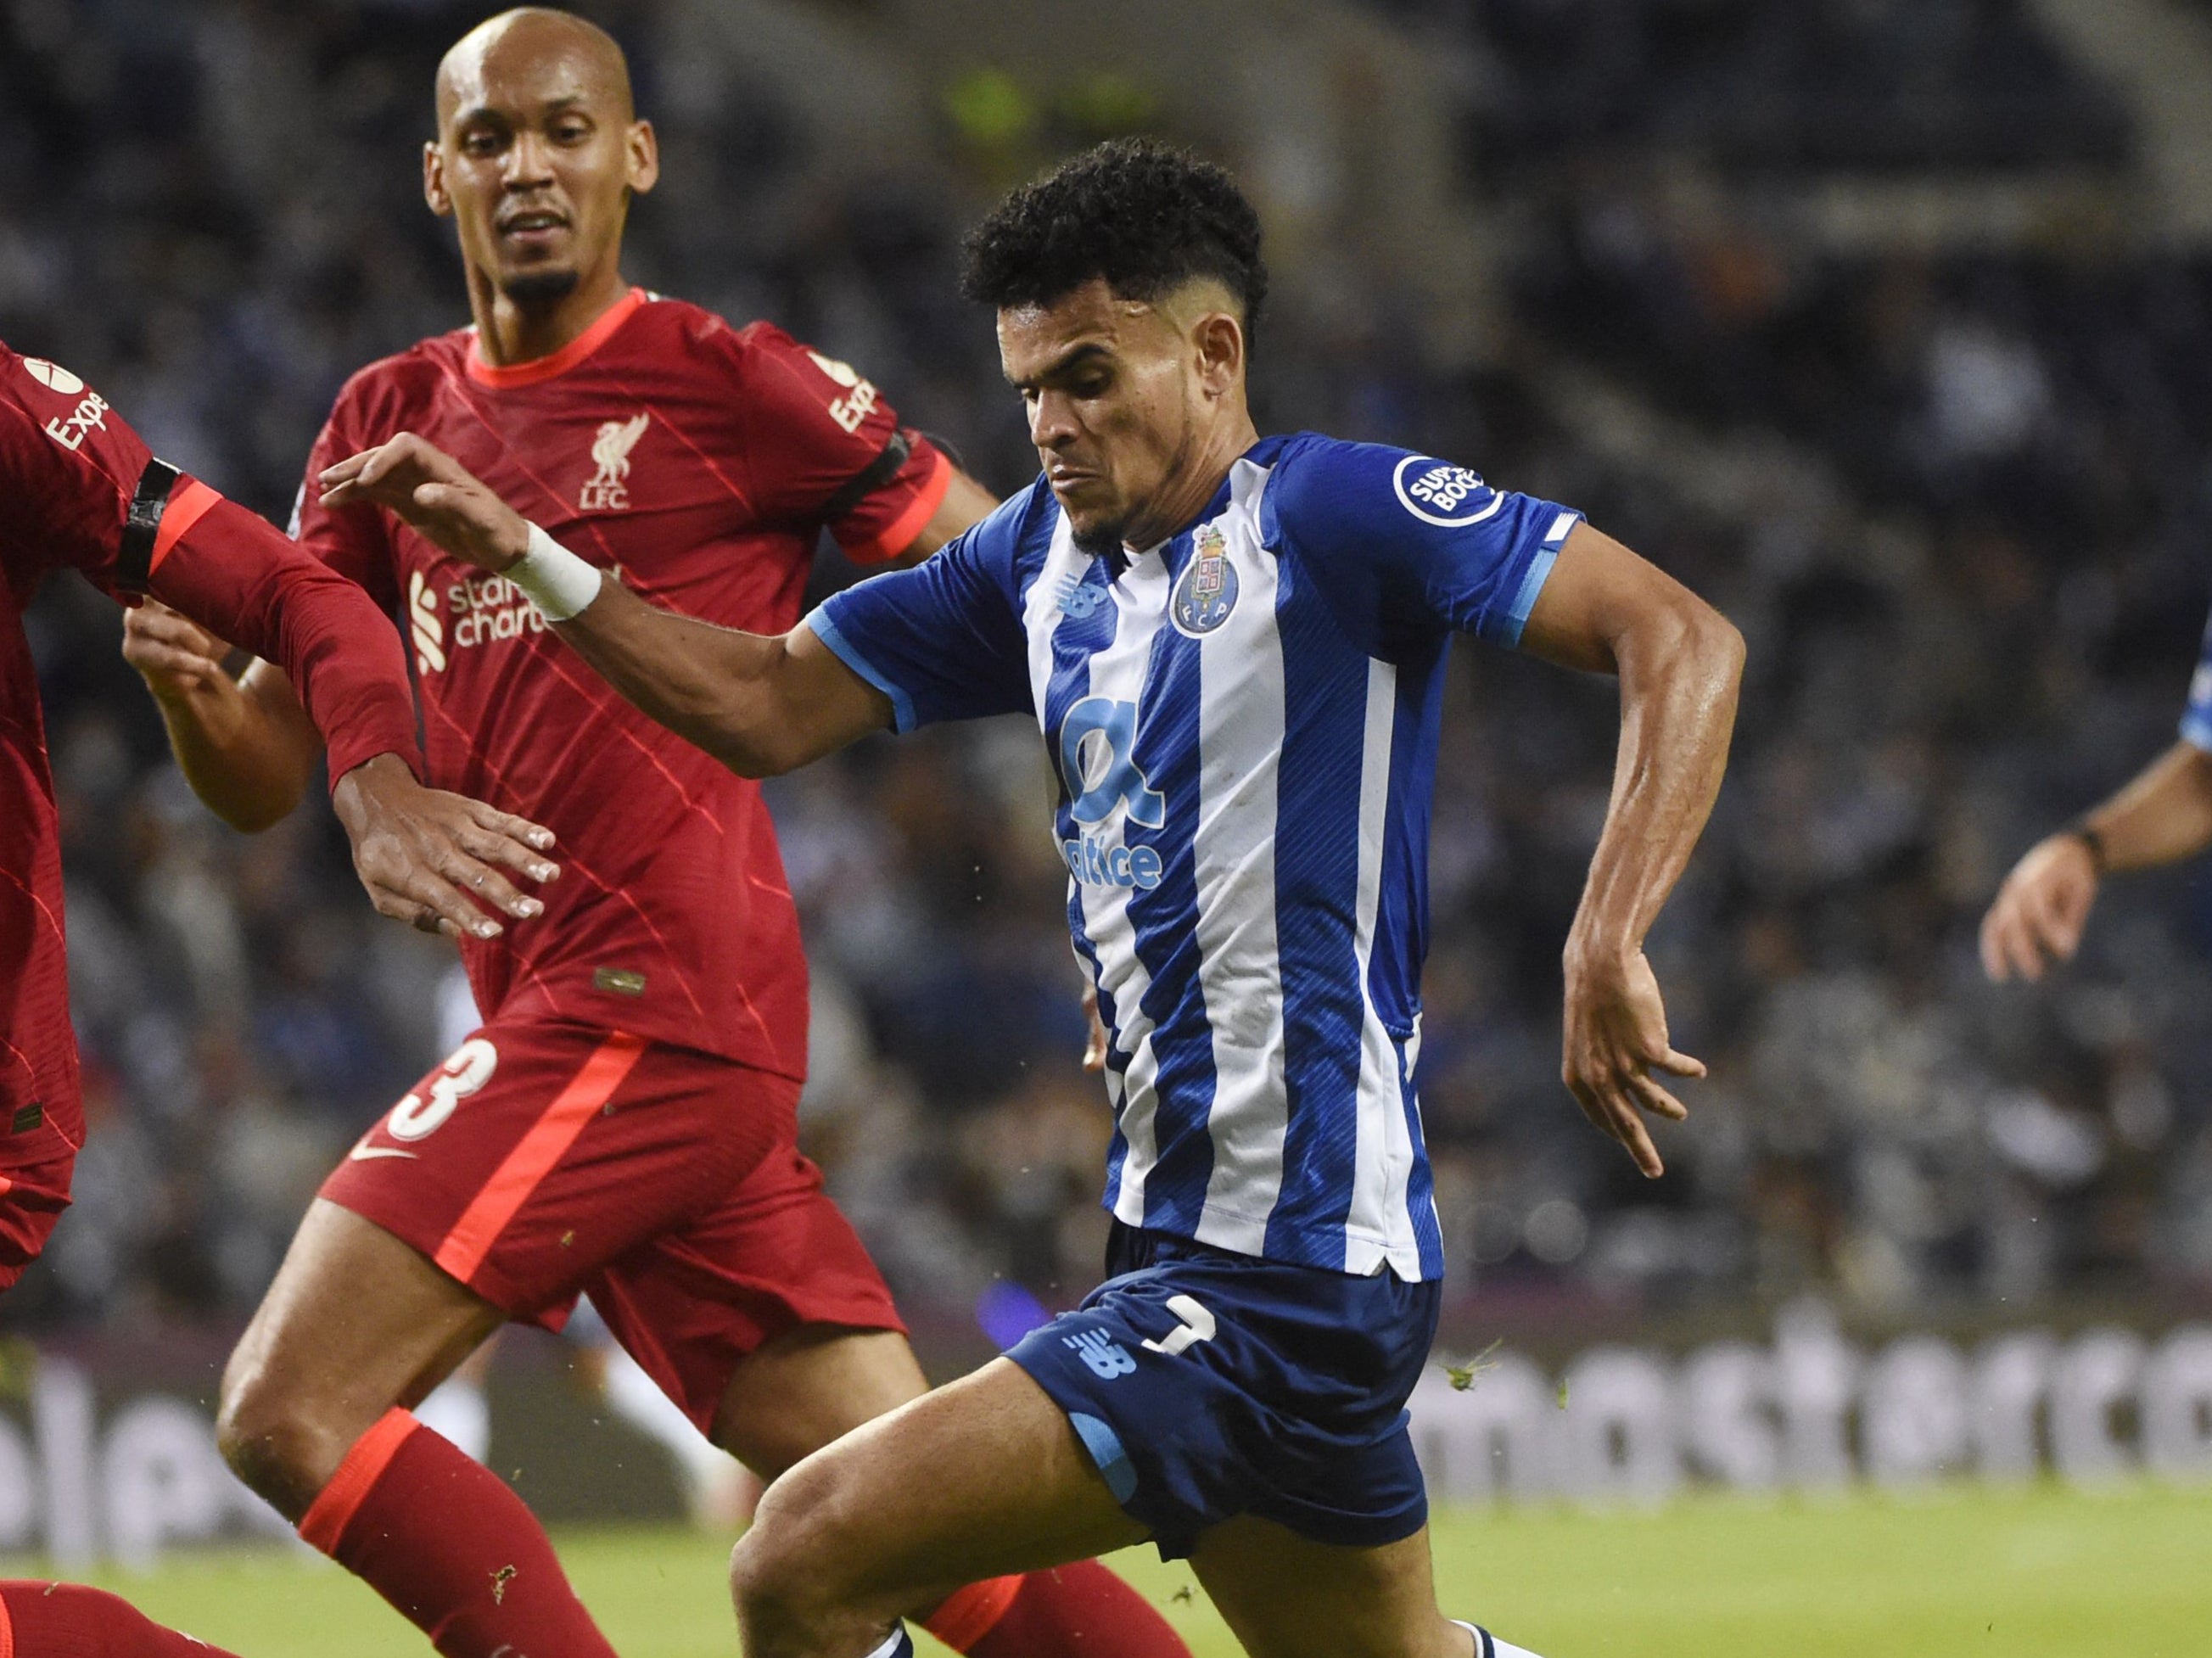 Diaz played for Porto against Liverpool in this season’s Champions League group stages